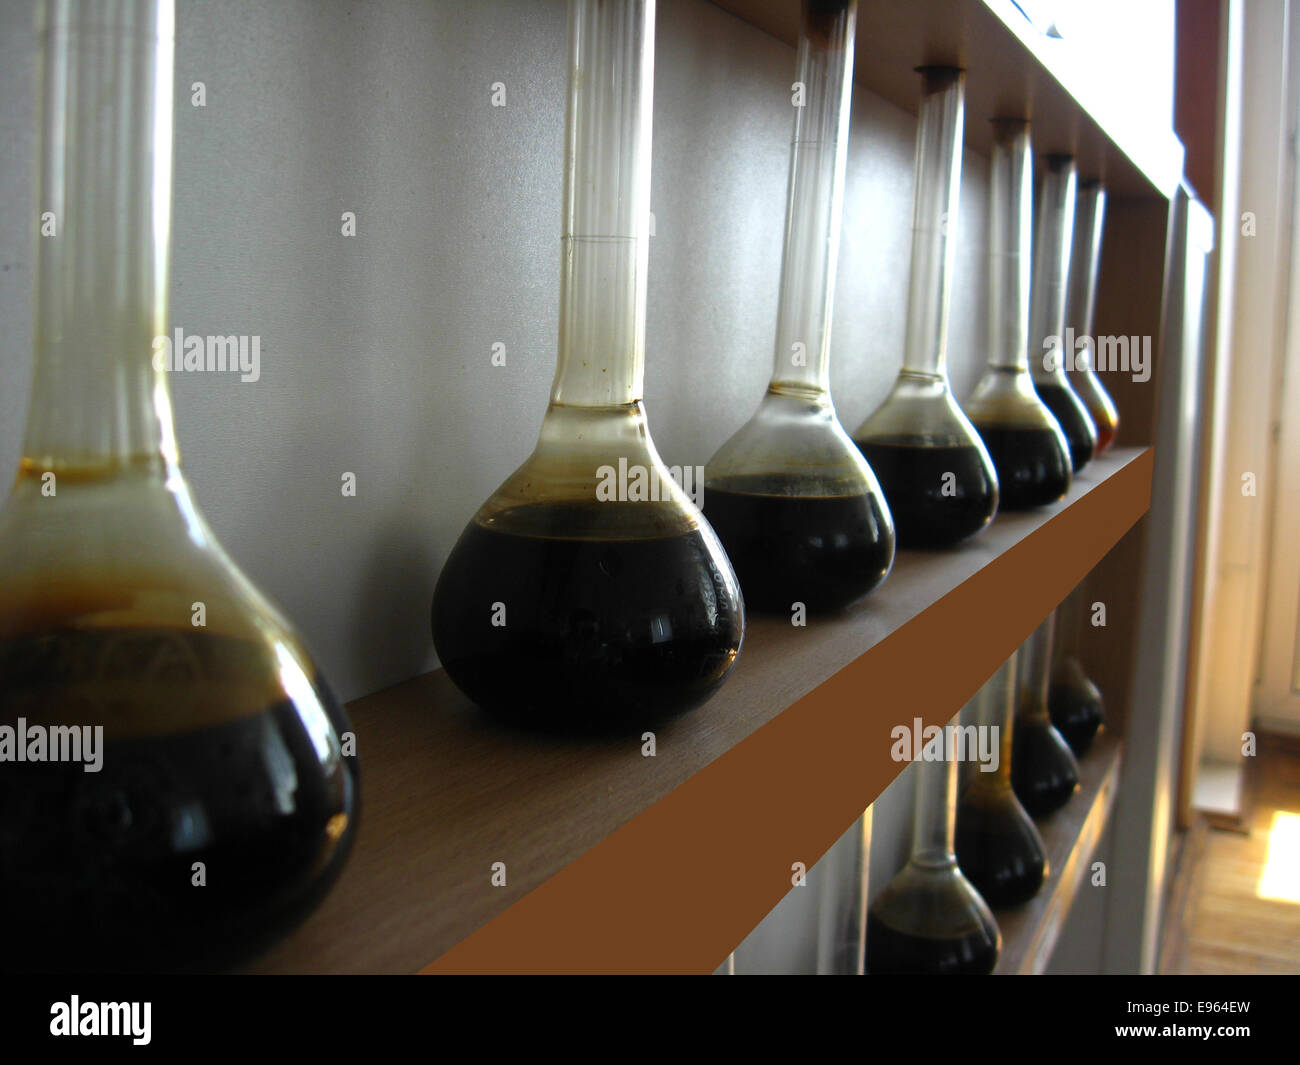 image with samples of oil in the flasks Stock Photo